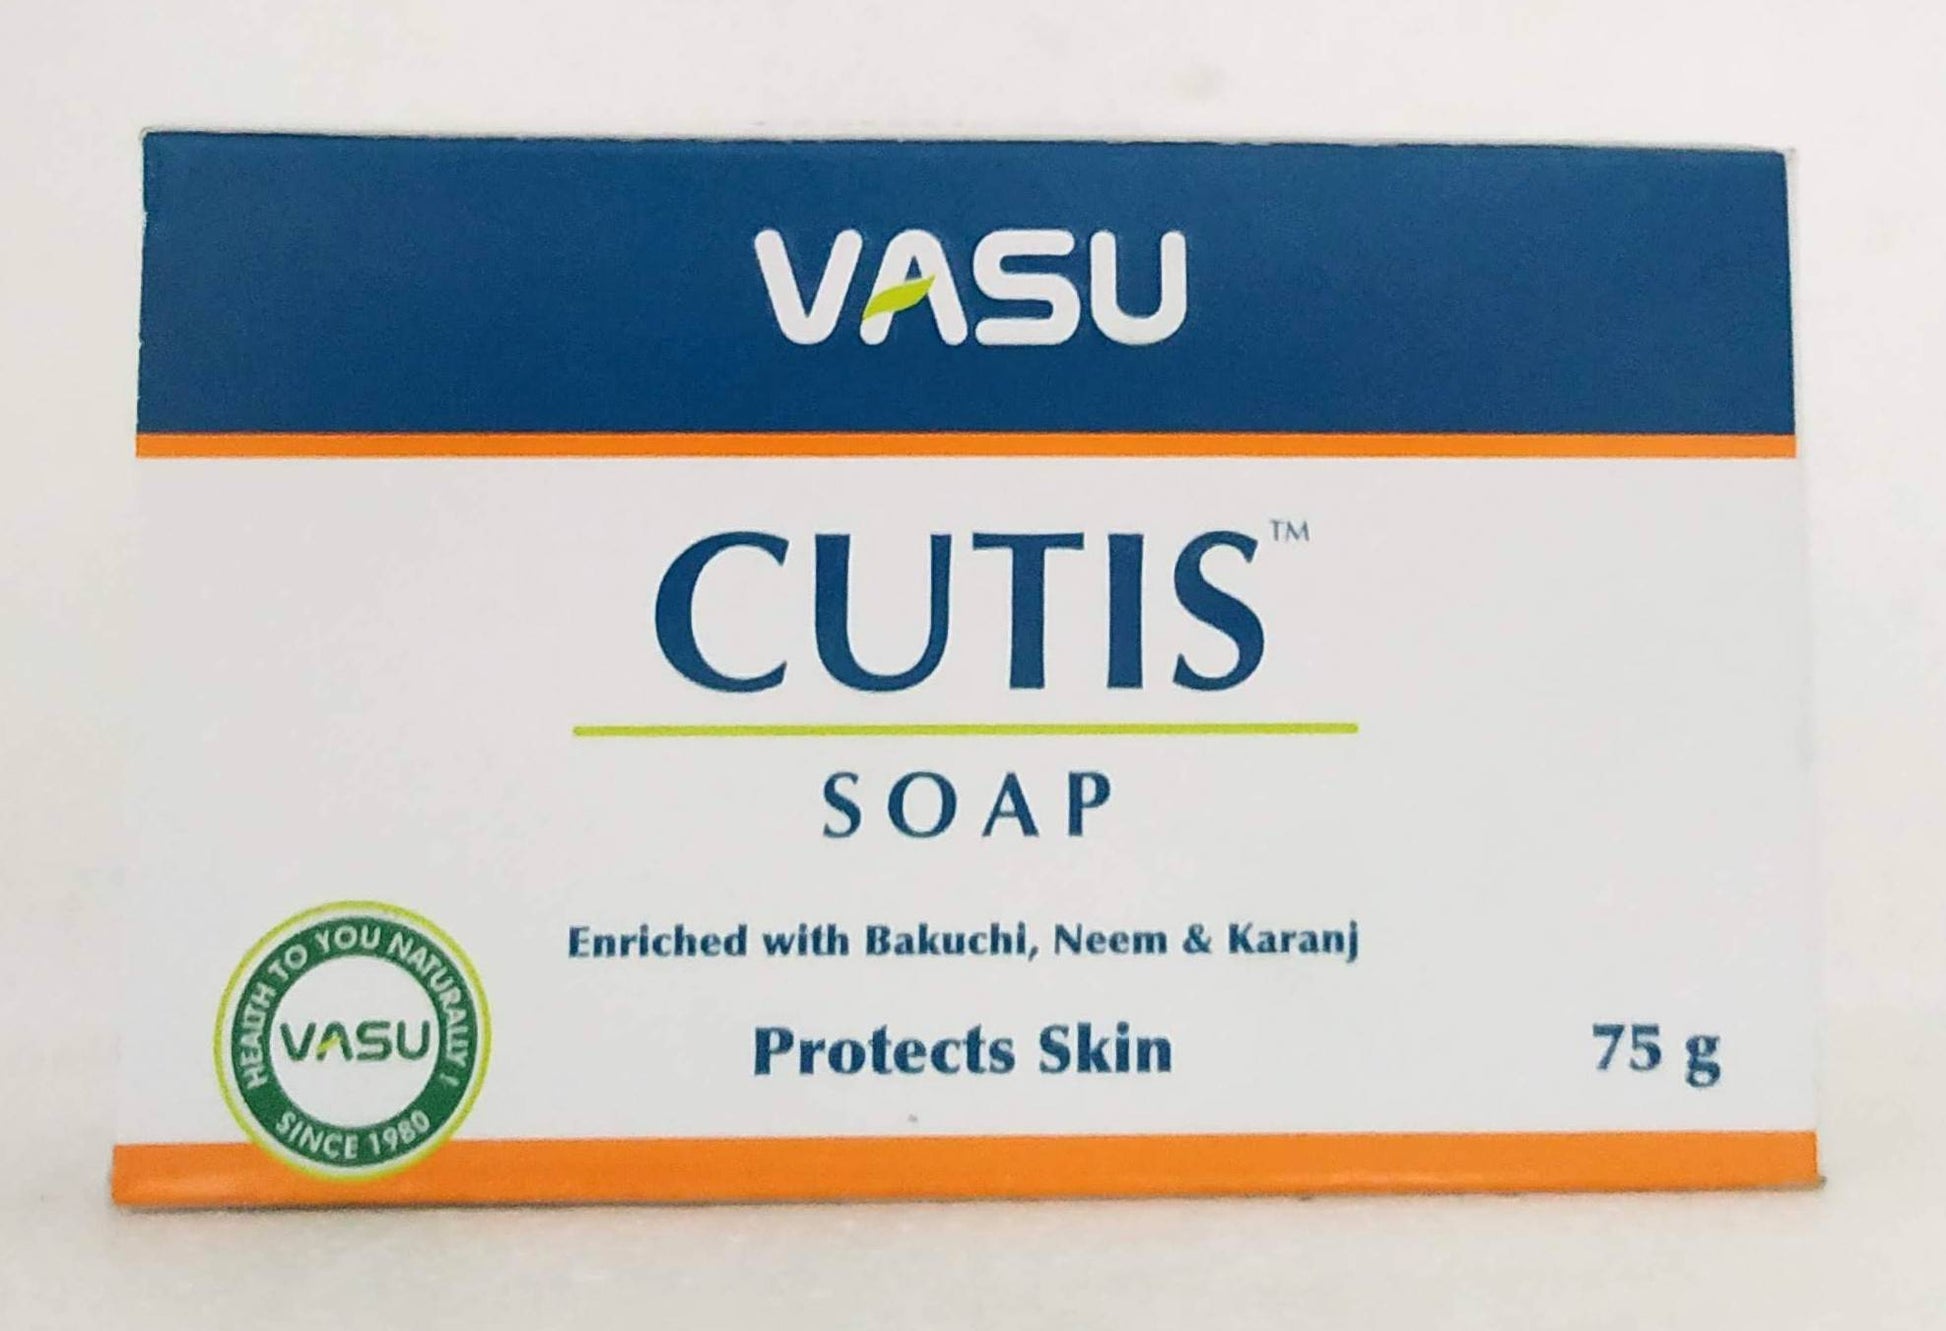 Shop Cutis soap 75gm at price 75.00 from Vasu herbals Online - Ayush Care